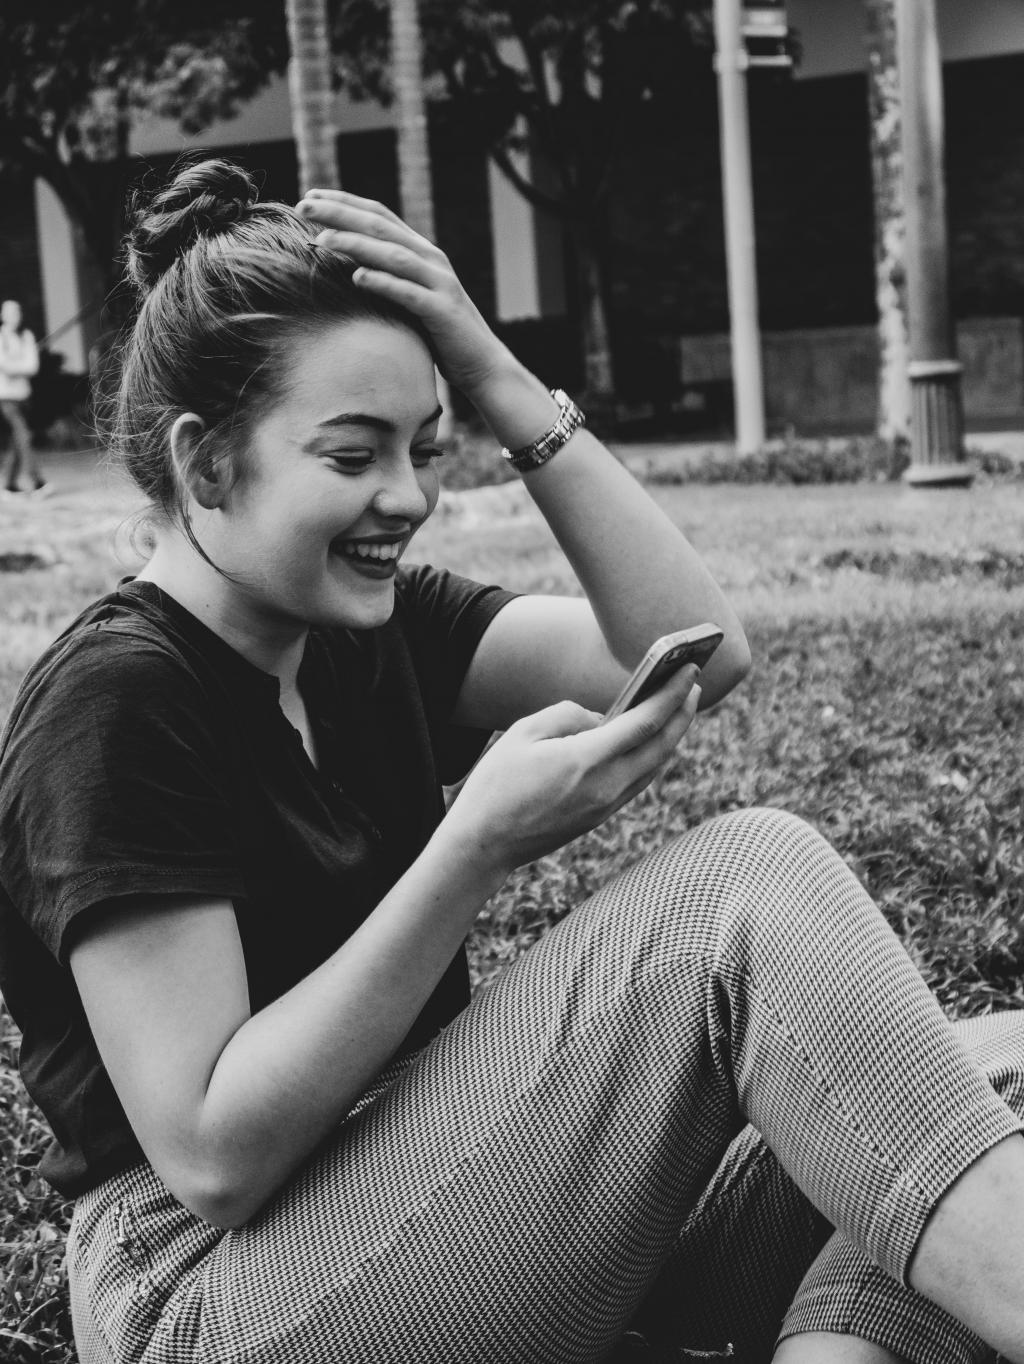 photo of a woman reading her mobile phone and laughing